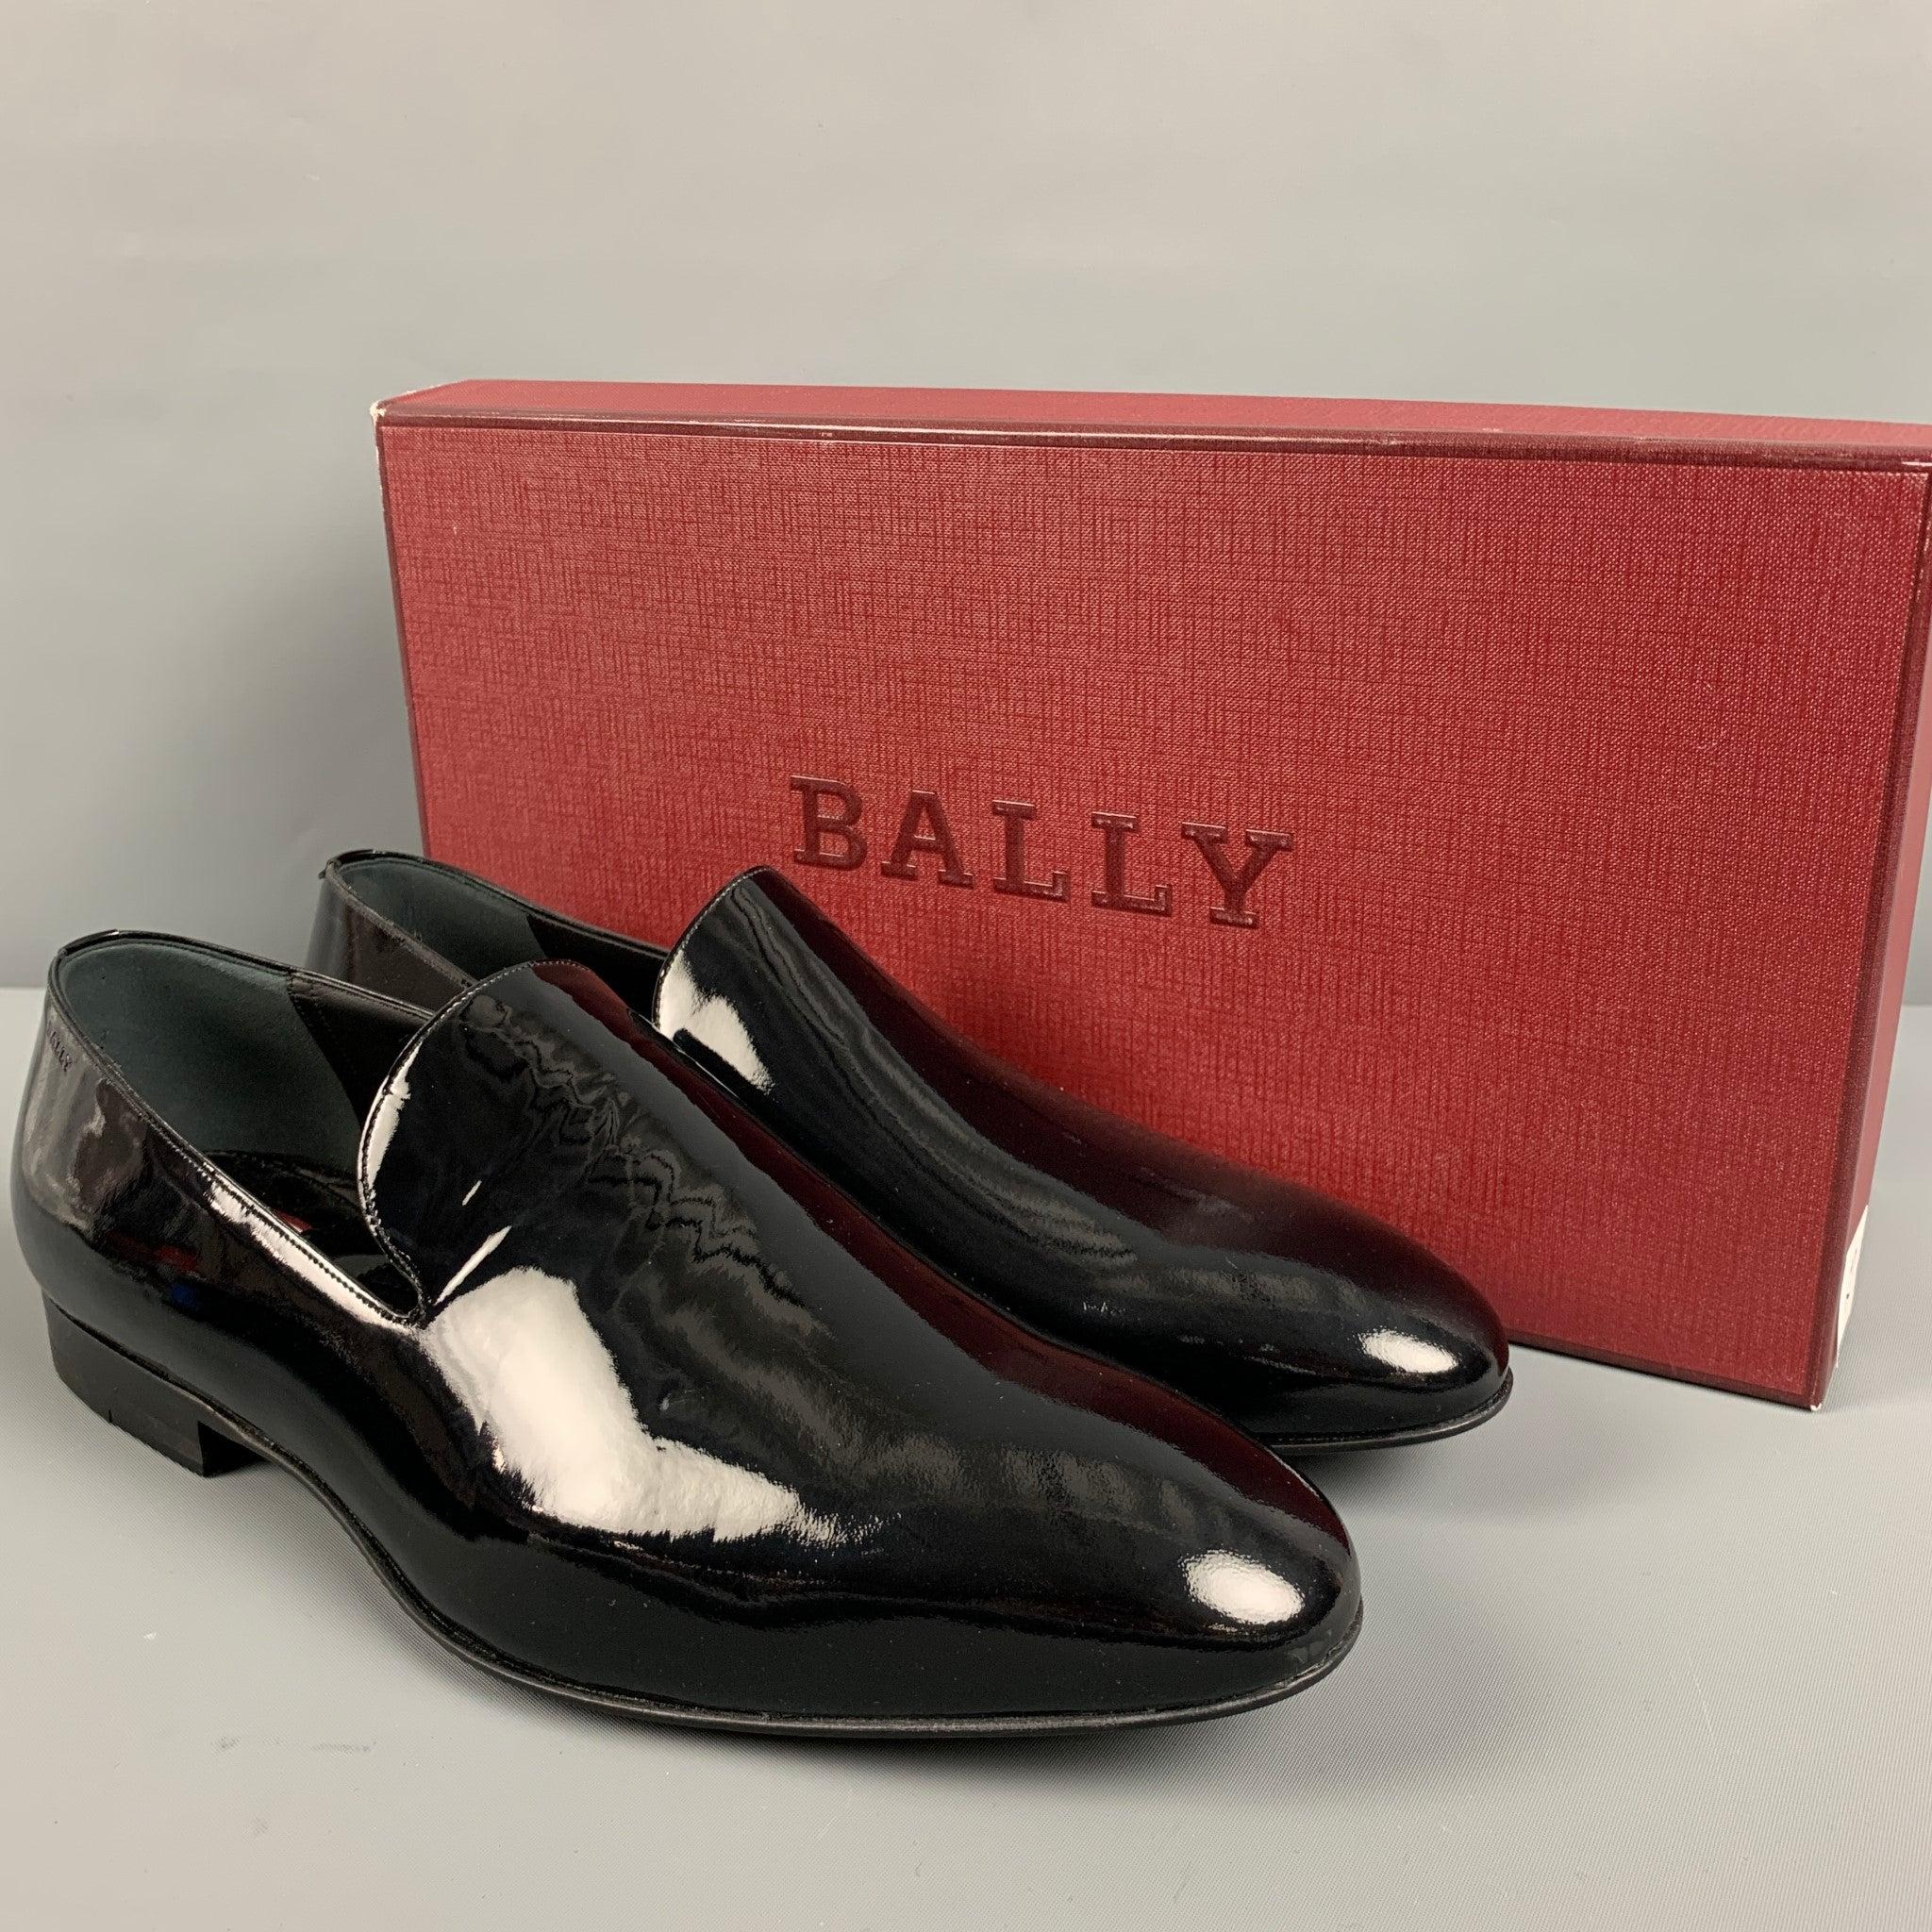 BALLY Size 7.5 Black Patent Leather Slip On Loafers For Sale 5